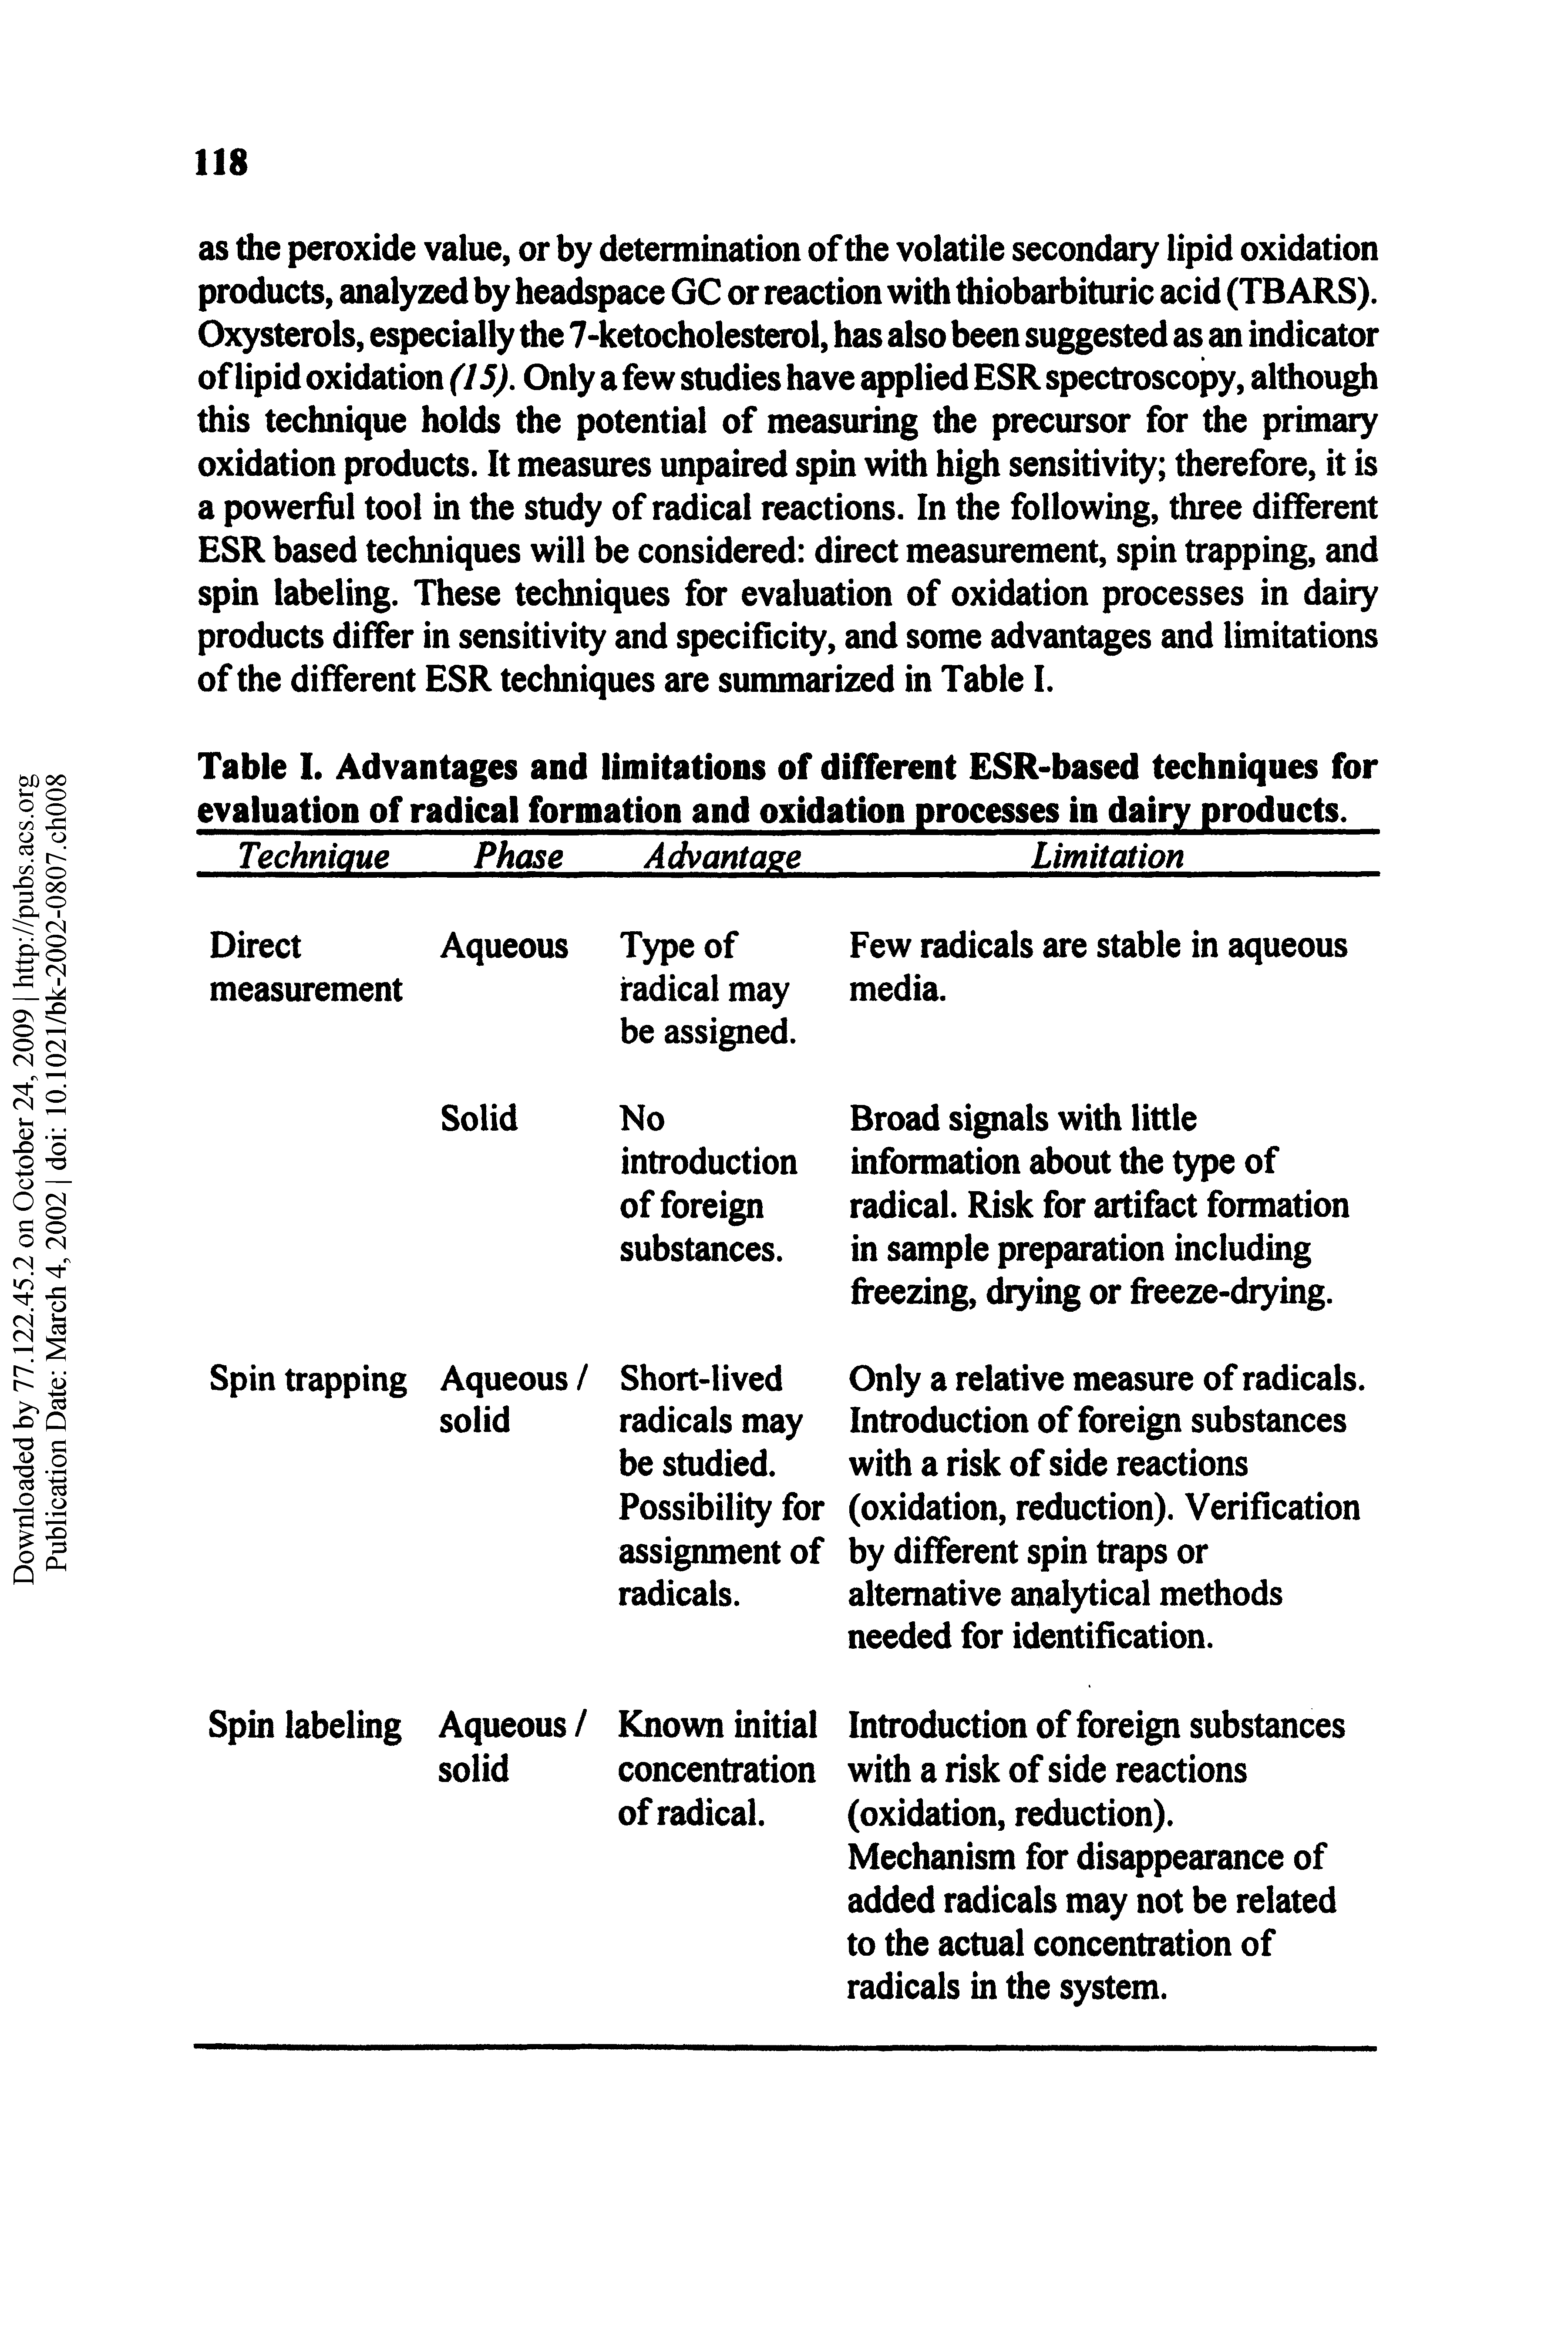 Table I. Advantages and limitations of different ESR-based techniques for...